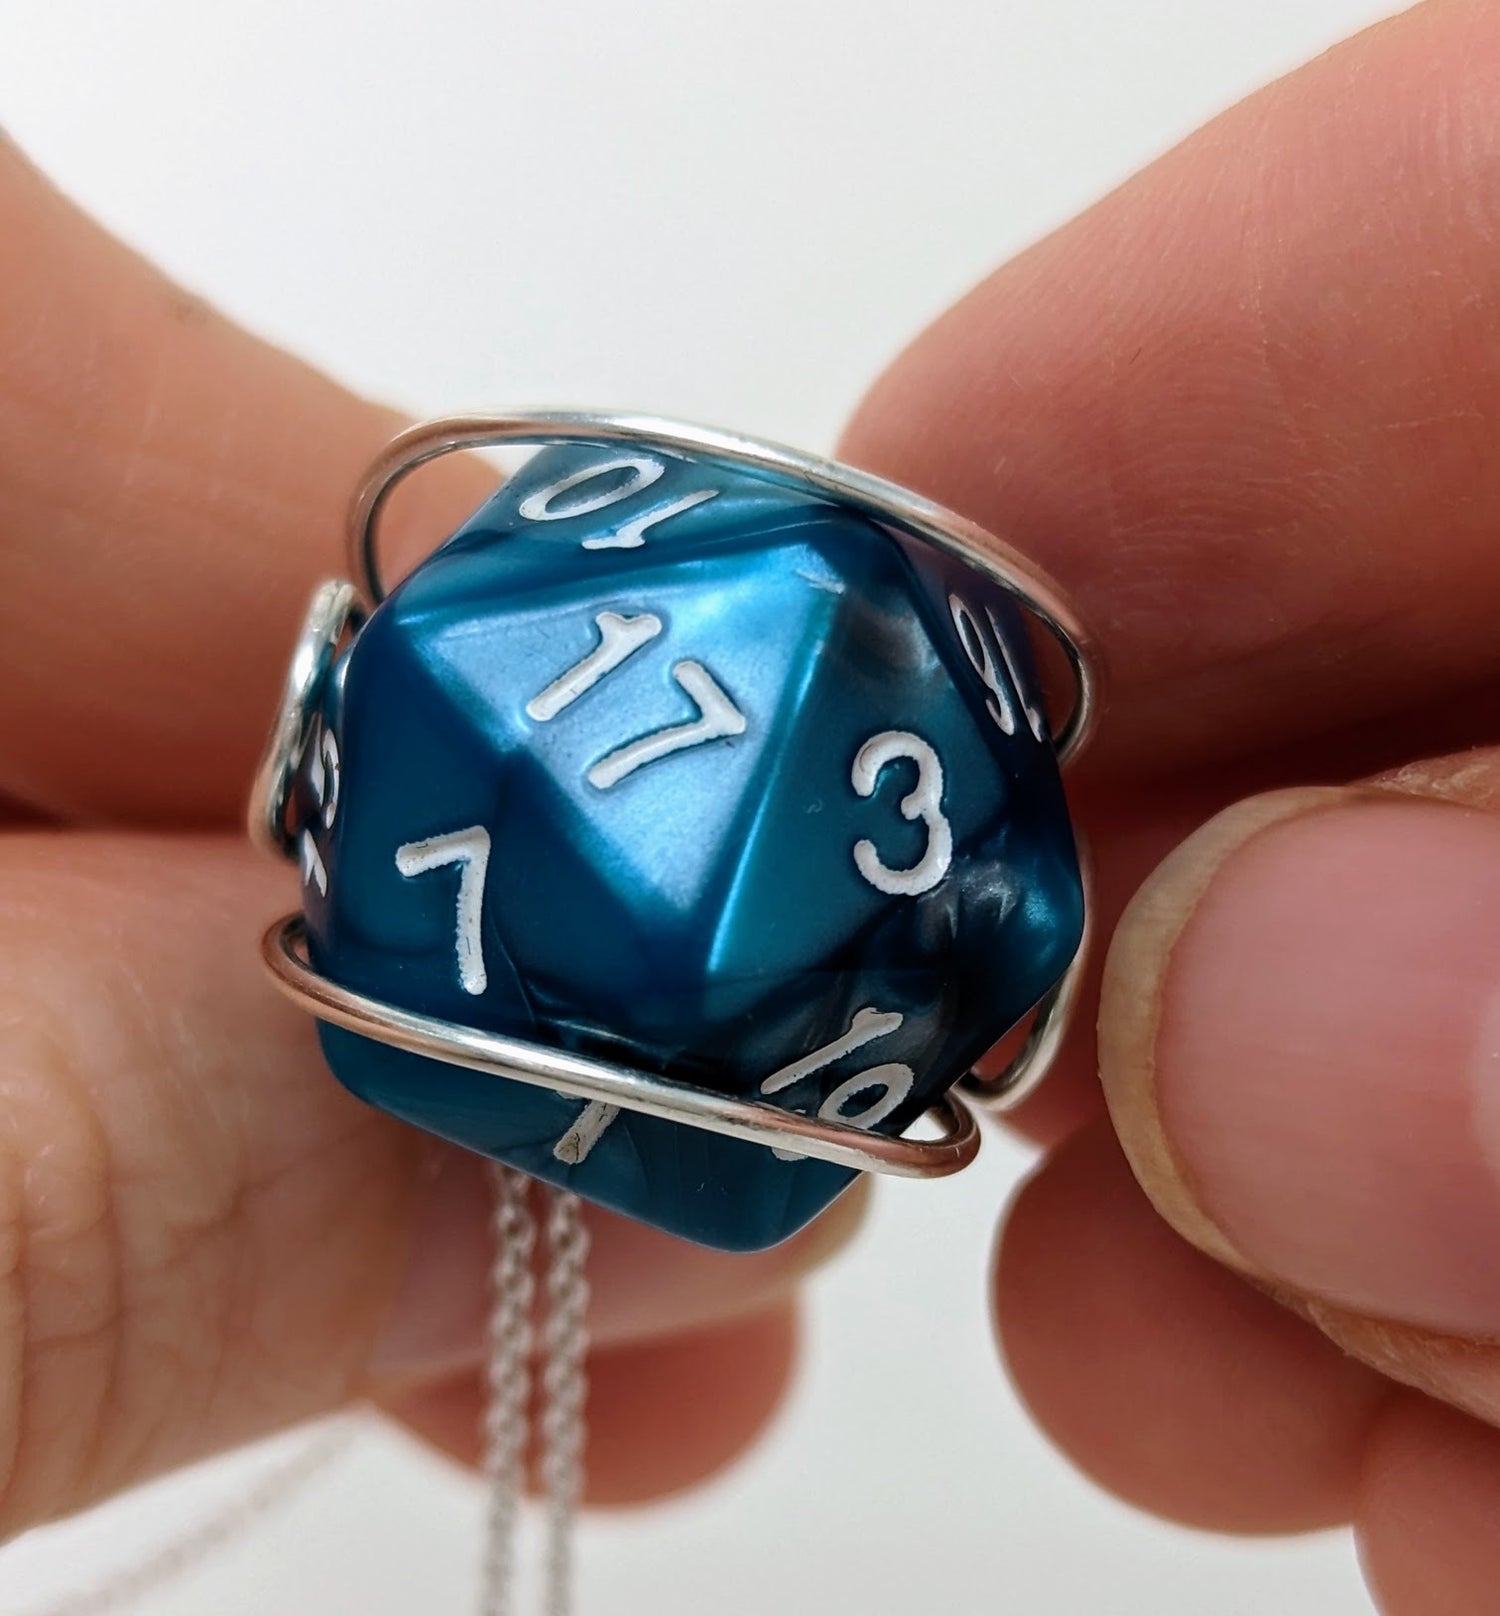 Wizard D20 Character Class Dice Necklace with Spellbook Charm - Blue D&D Dice Pendant Gold Color